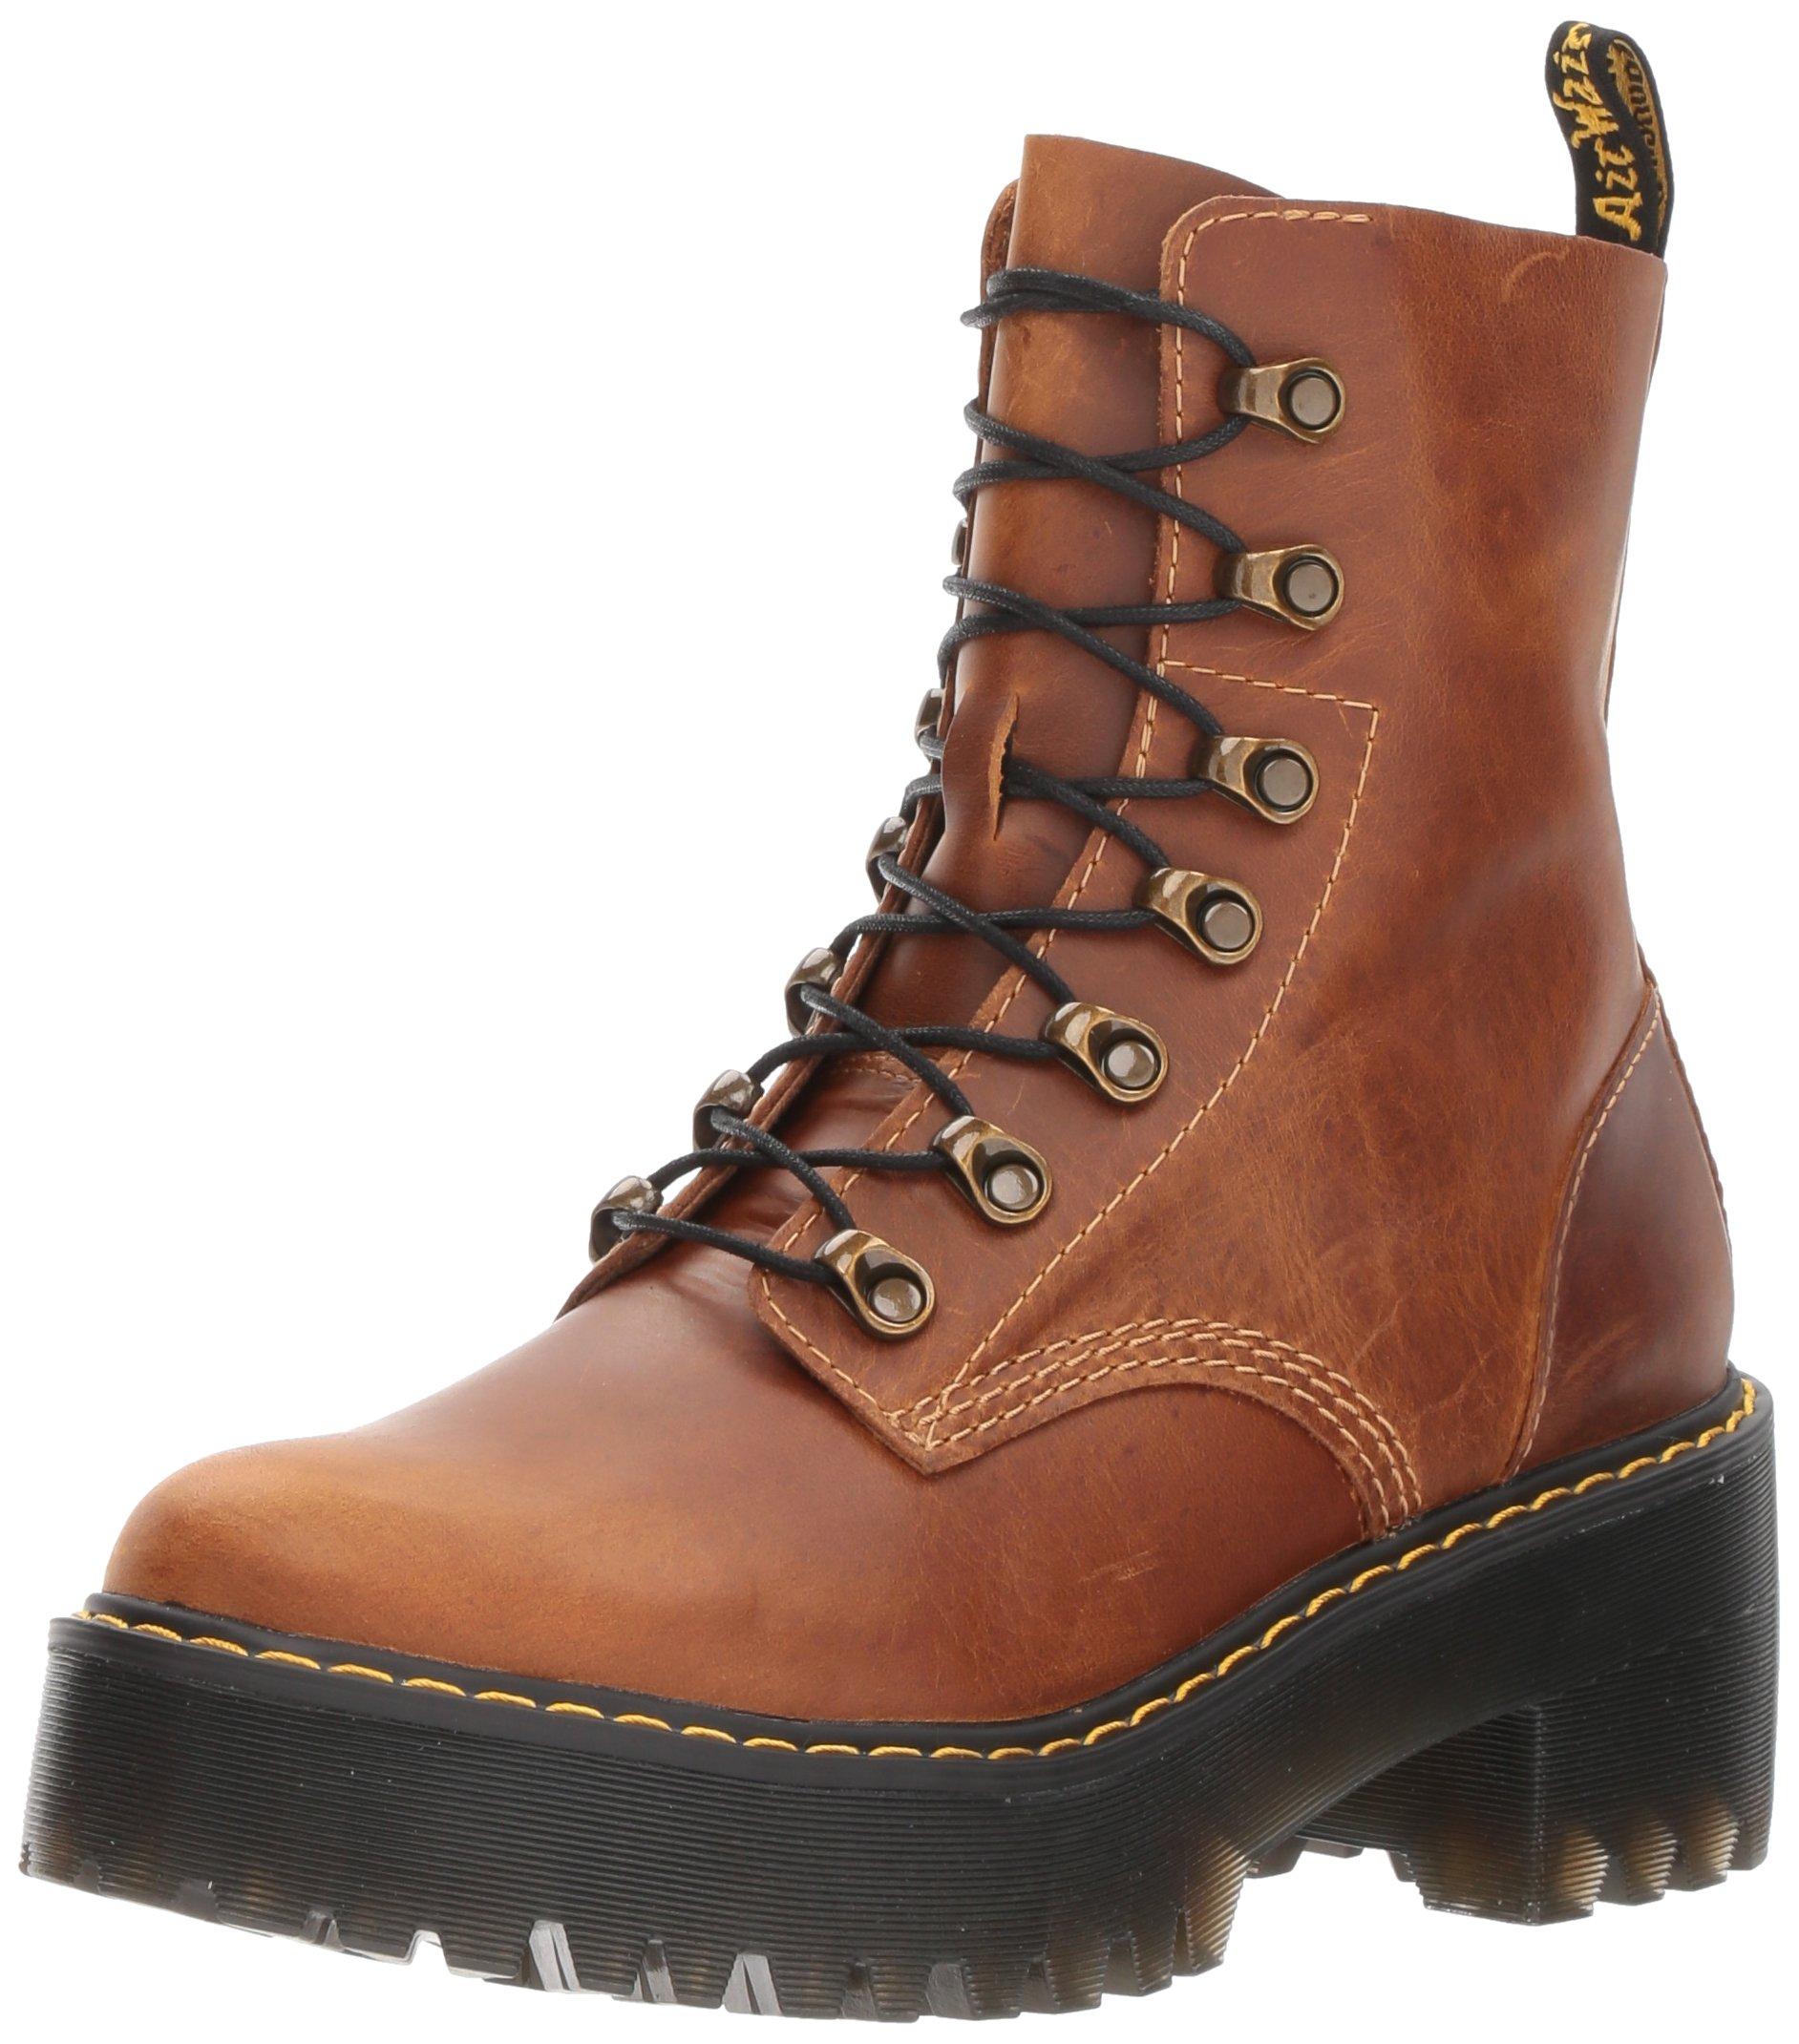 Dr. Martens Leona Fashion Boot in Brown | Lyst